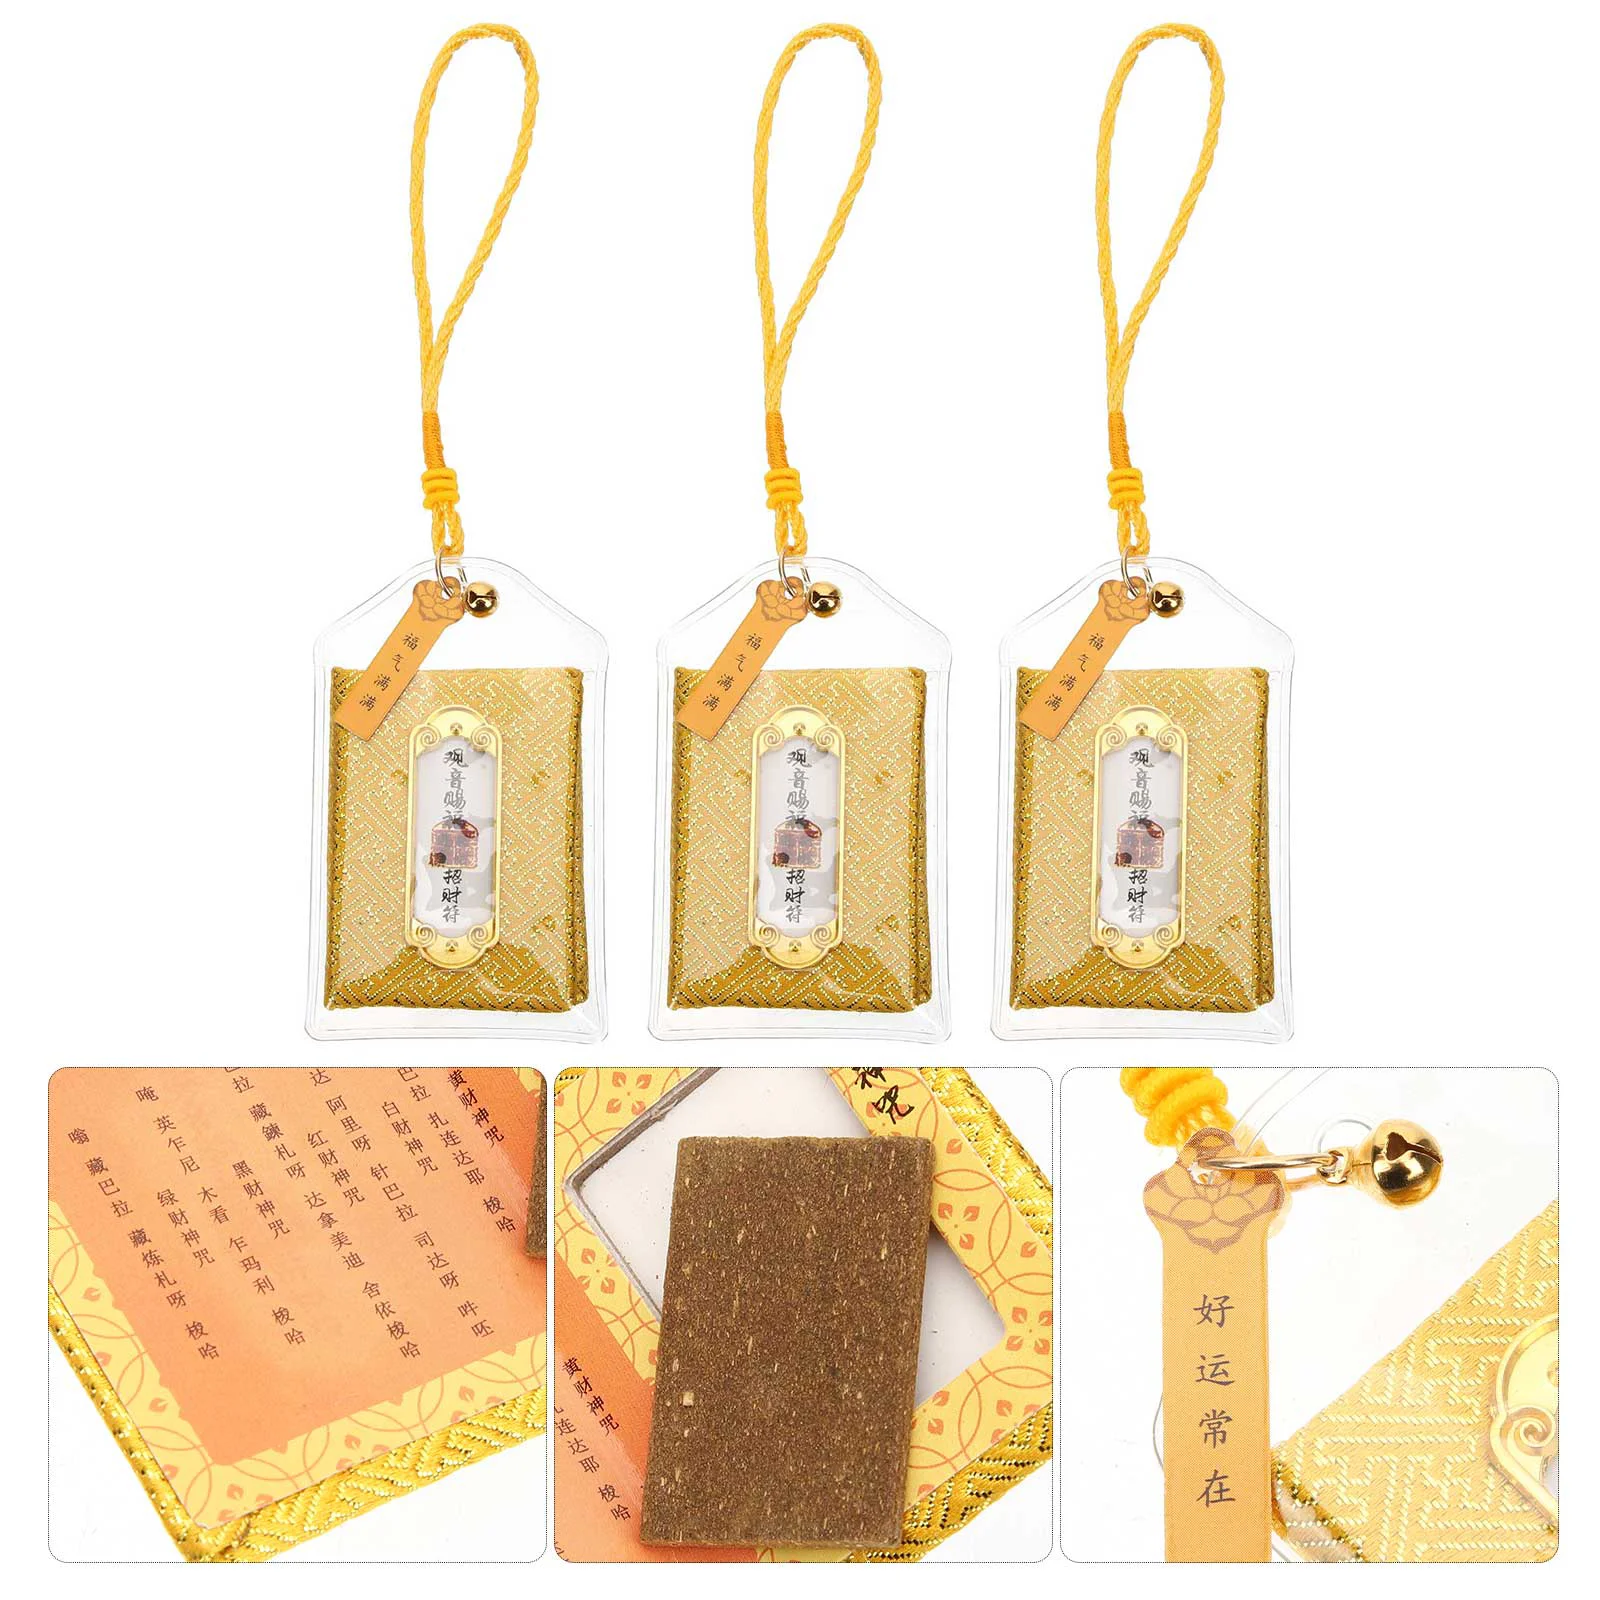 

Japanese Charm Amulet Luck Omamori Good Charms Blessing Car Fortune Pendant Japan Lucky Protection Sachet Cat Shrine Jewely